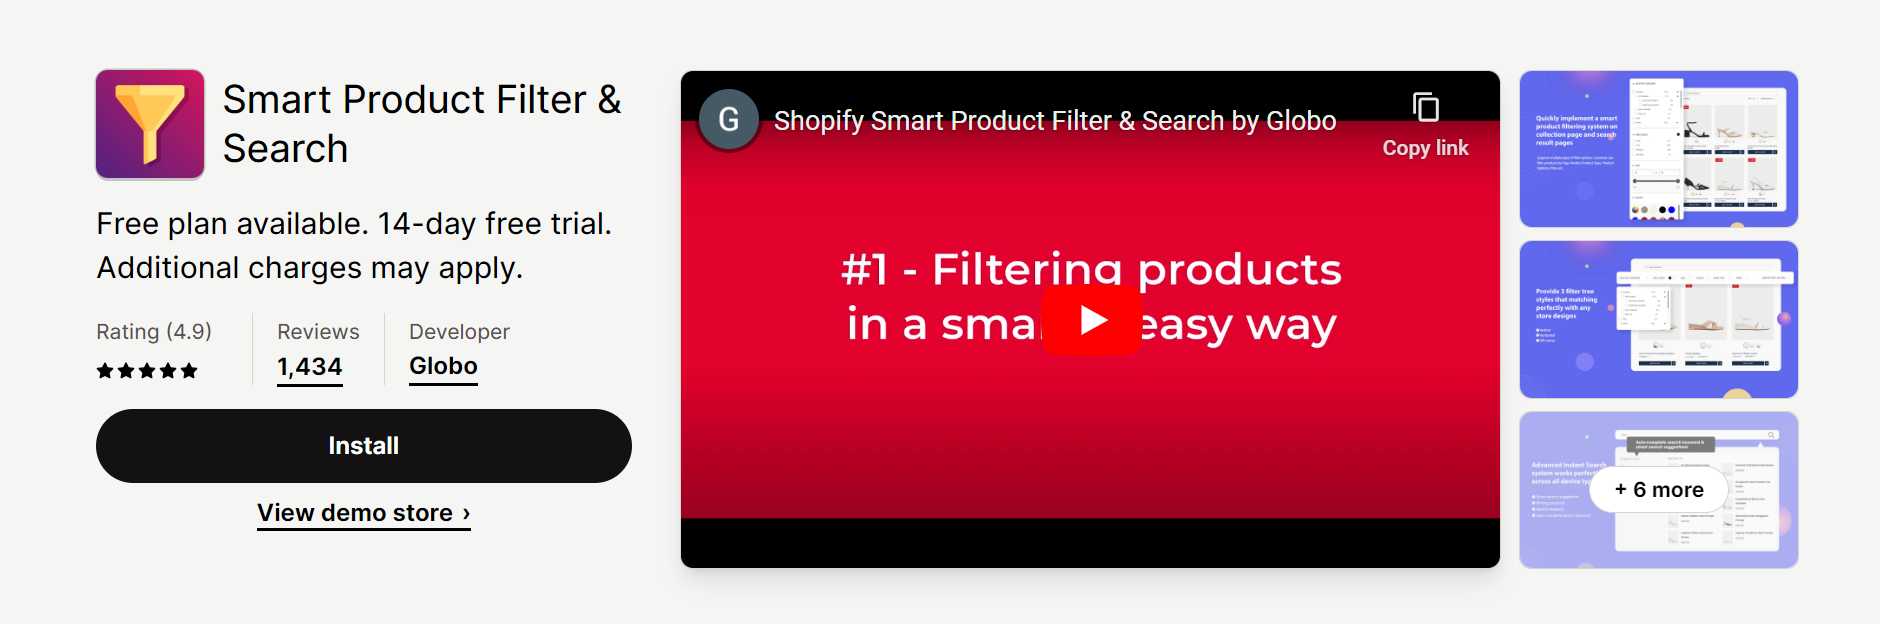 Smart Product Filter & Search